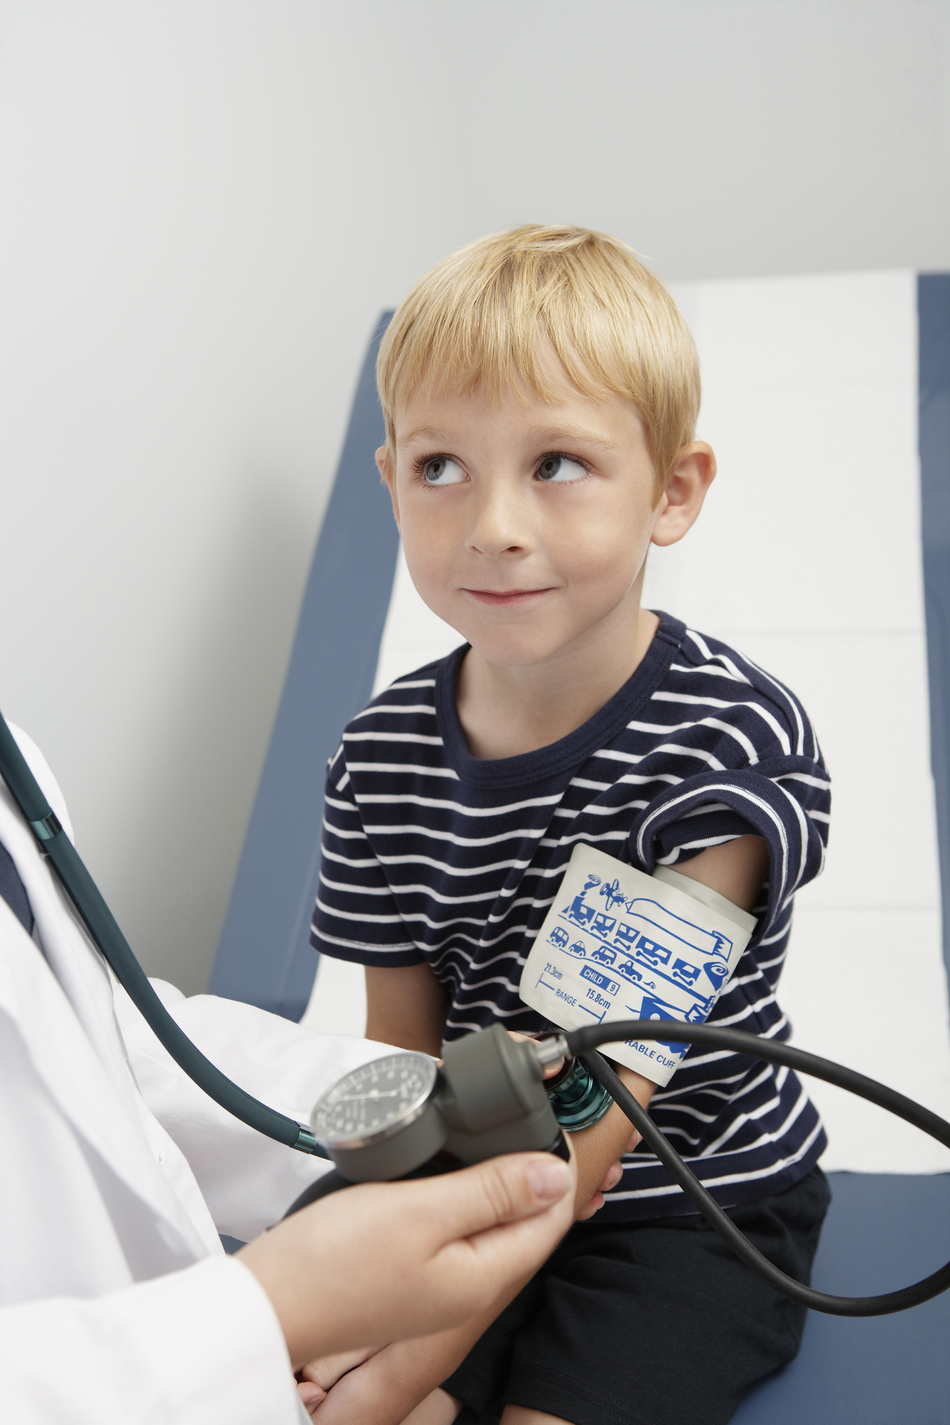 Kids Can Have High Blood Pressure, Too